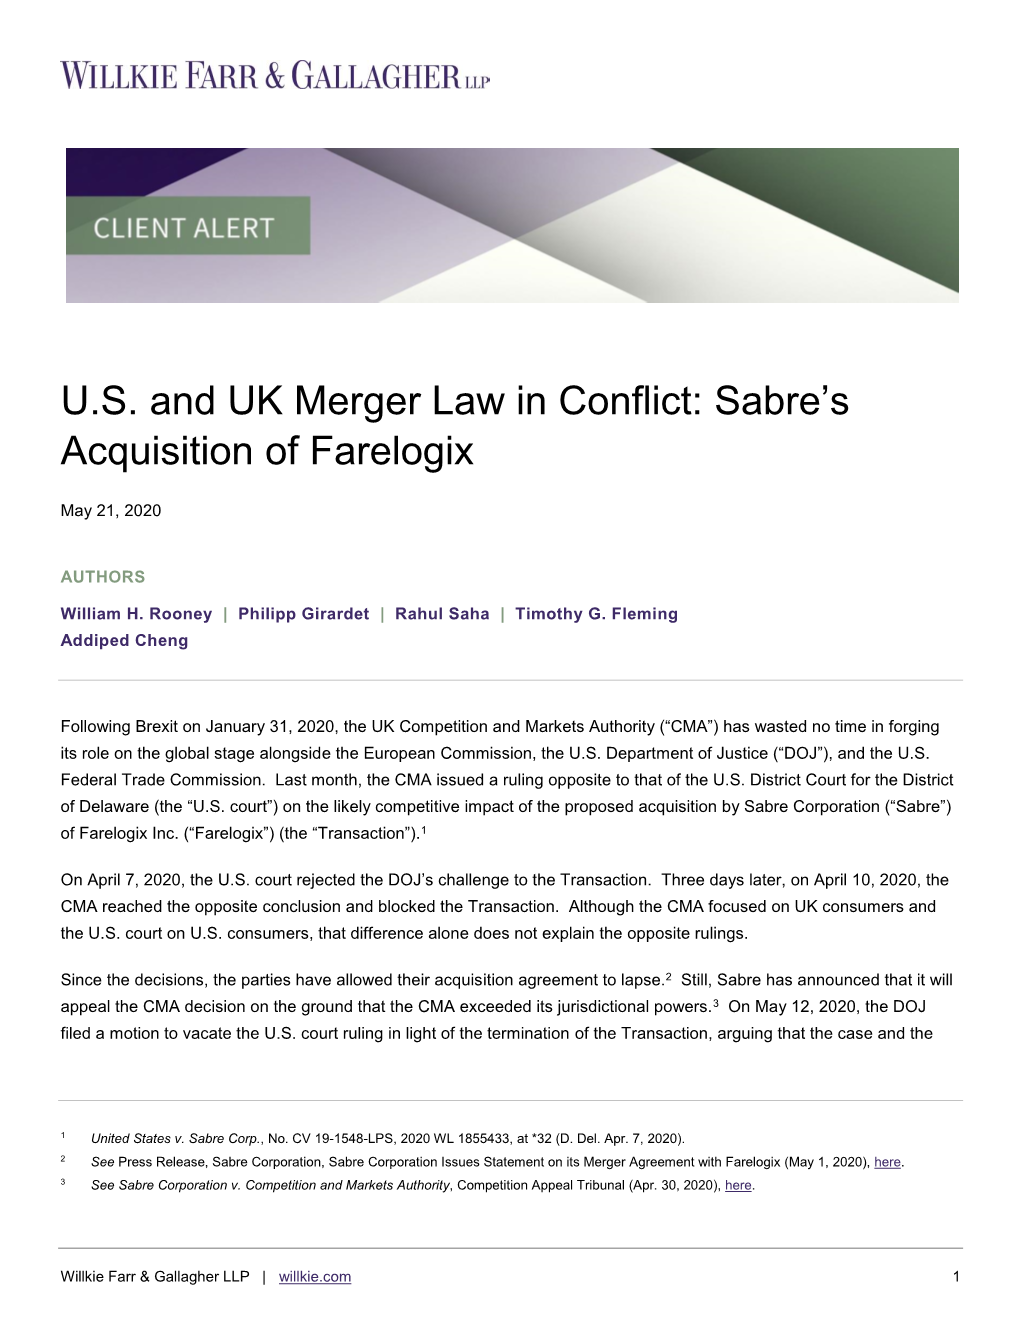 U.S. and UK Merger Law in Conflict: Sabre's Acquisition of Farelogix